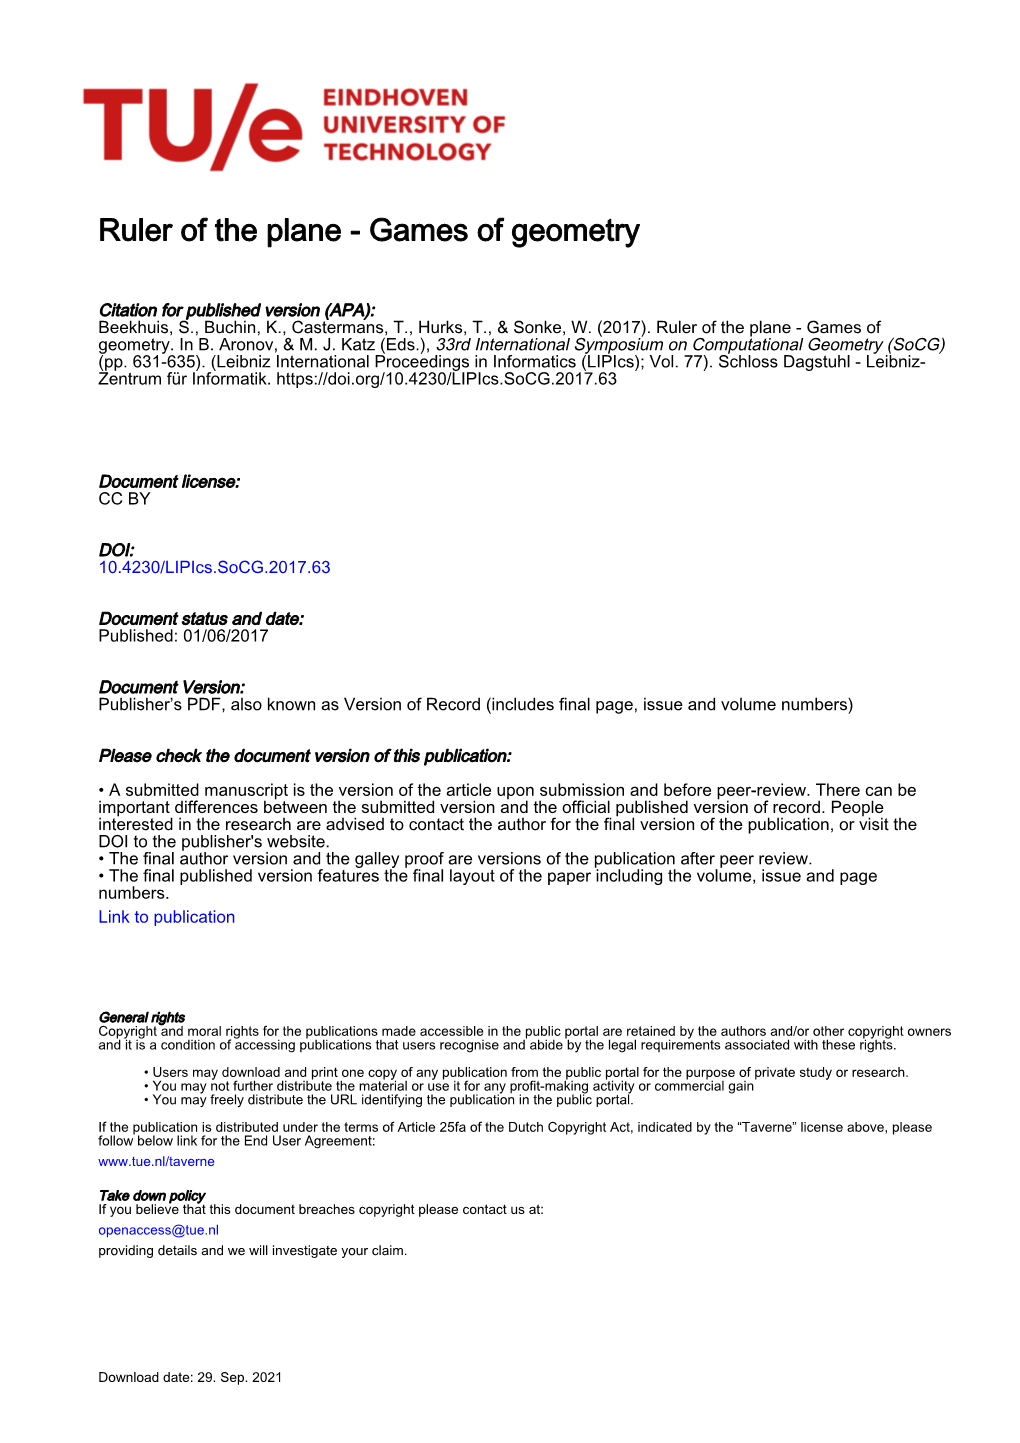 Ruler of the Plane - Games of Geometry